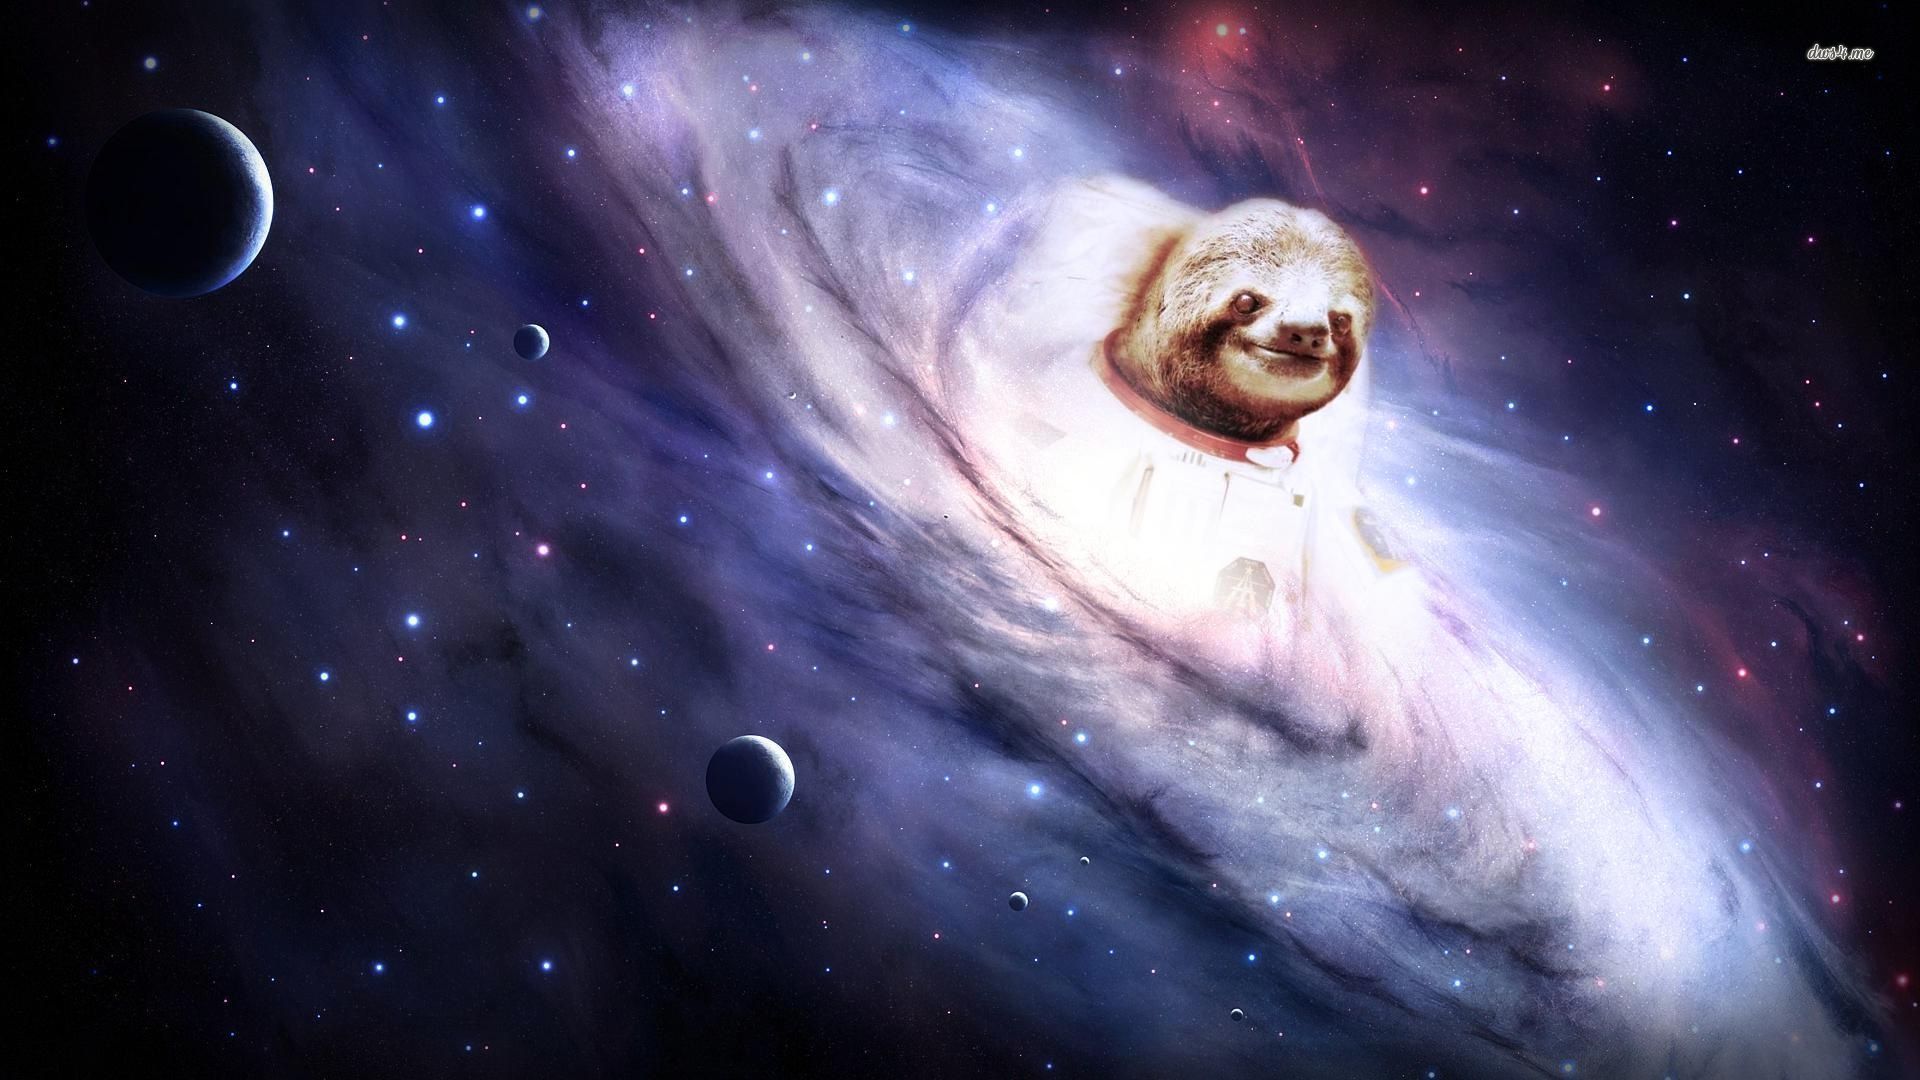 Astronaut Sloth Wallpaper Pics About Space